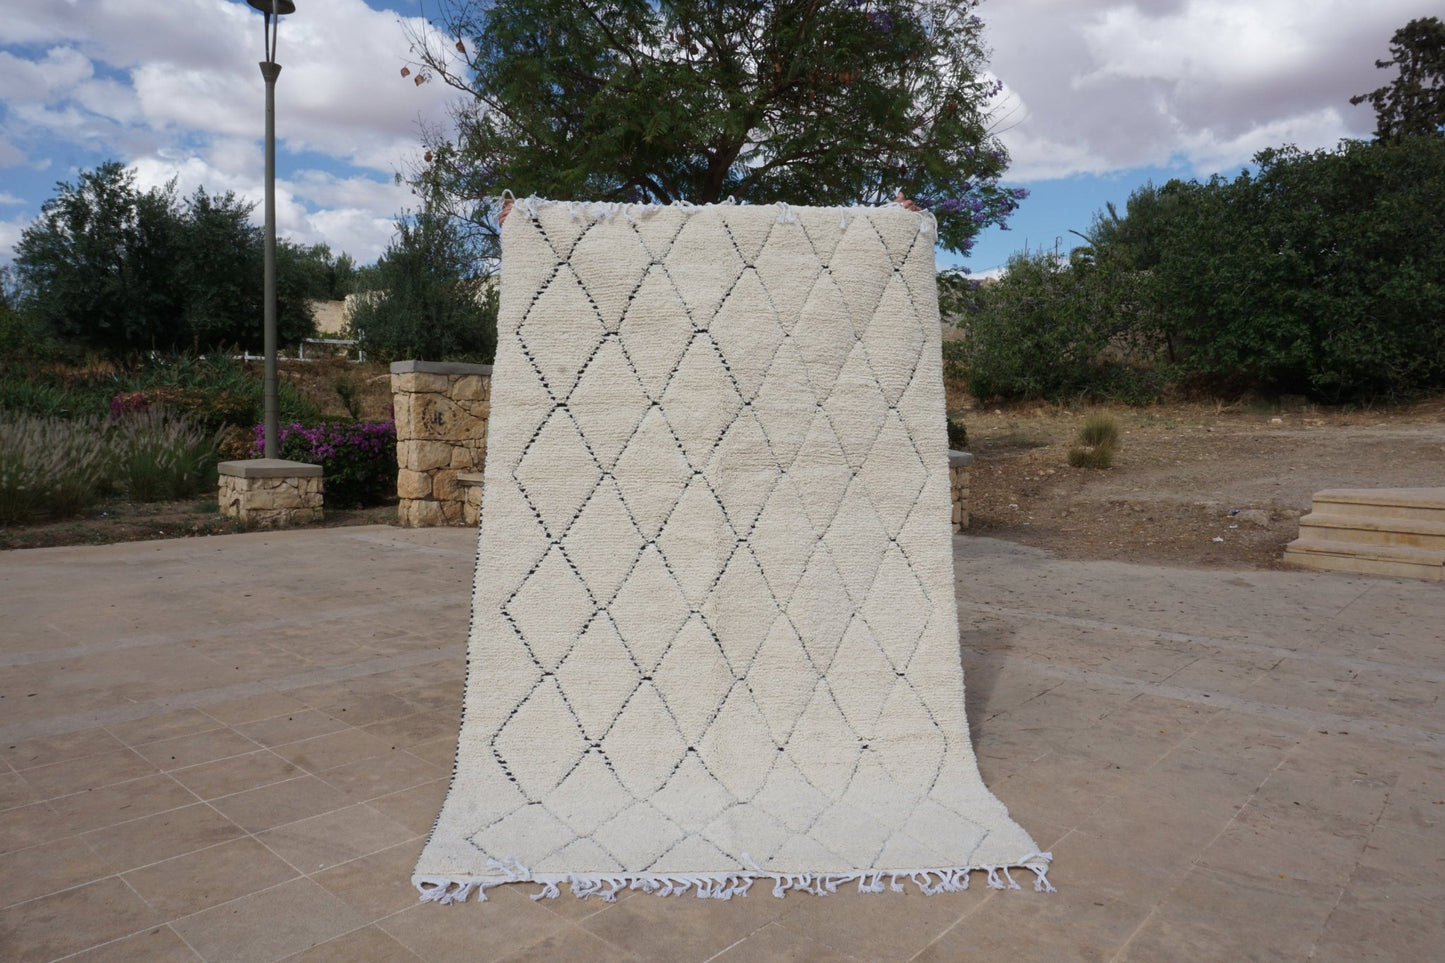 Handcrafted Beni Ouarain Rug - 6x10 Feet - Classic Moroccan White Wool with Geometric Patterns - Ethically Crafted by Berber Artisans - Handmade by My Poufs